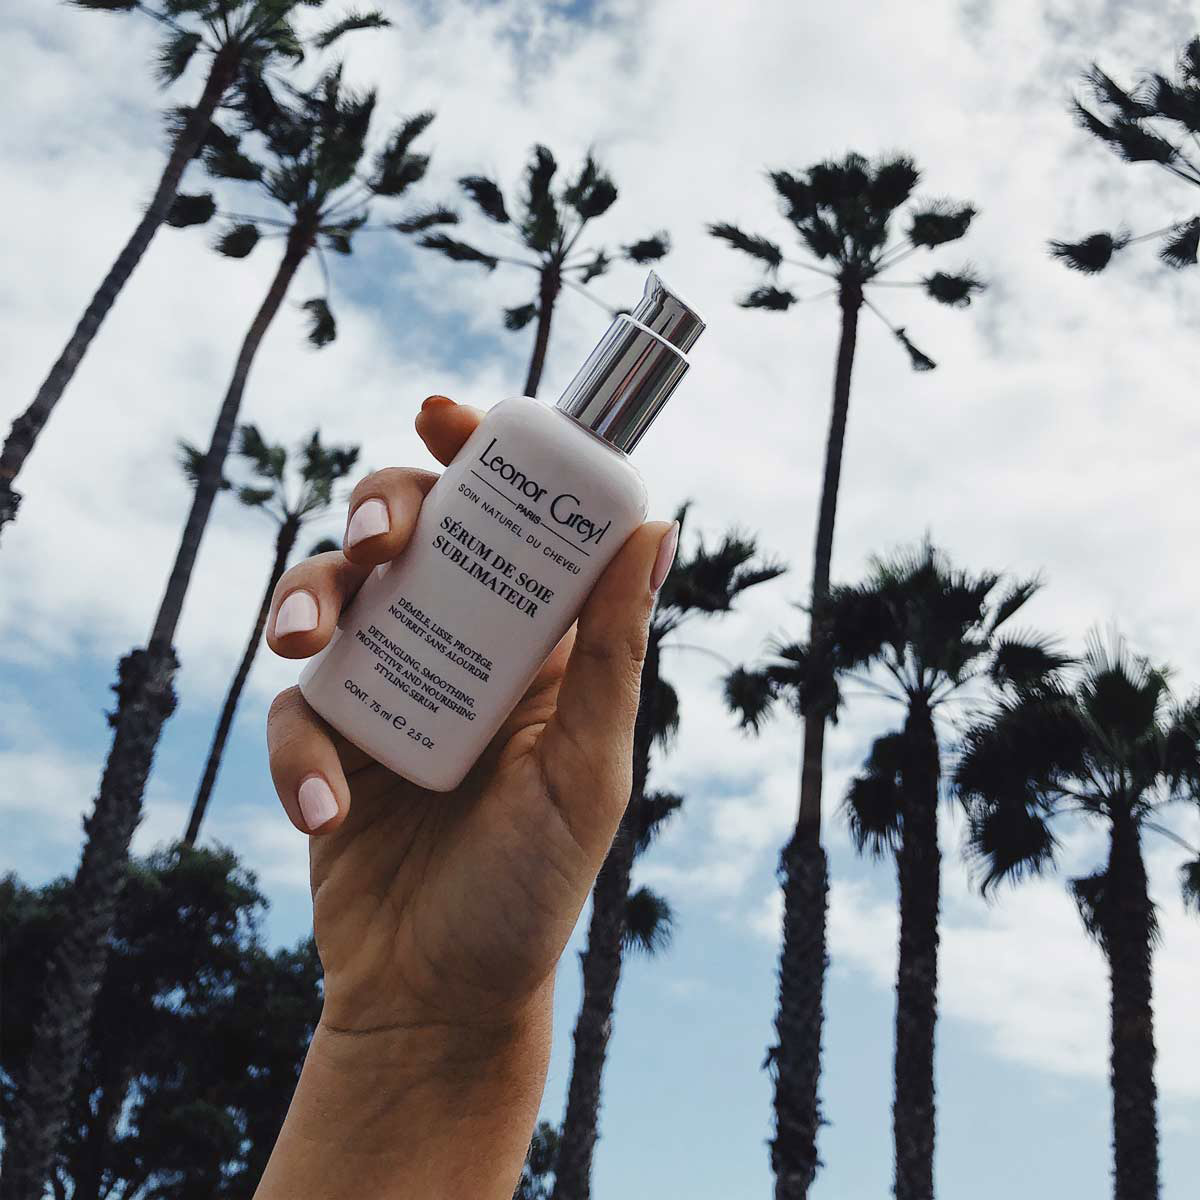 hand holding Leonor Greyl Serum with palm trees and sky in background